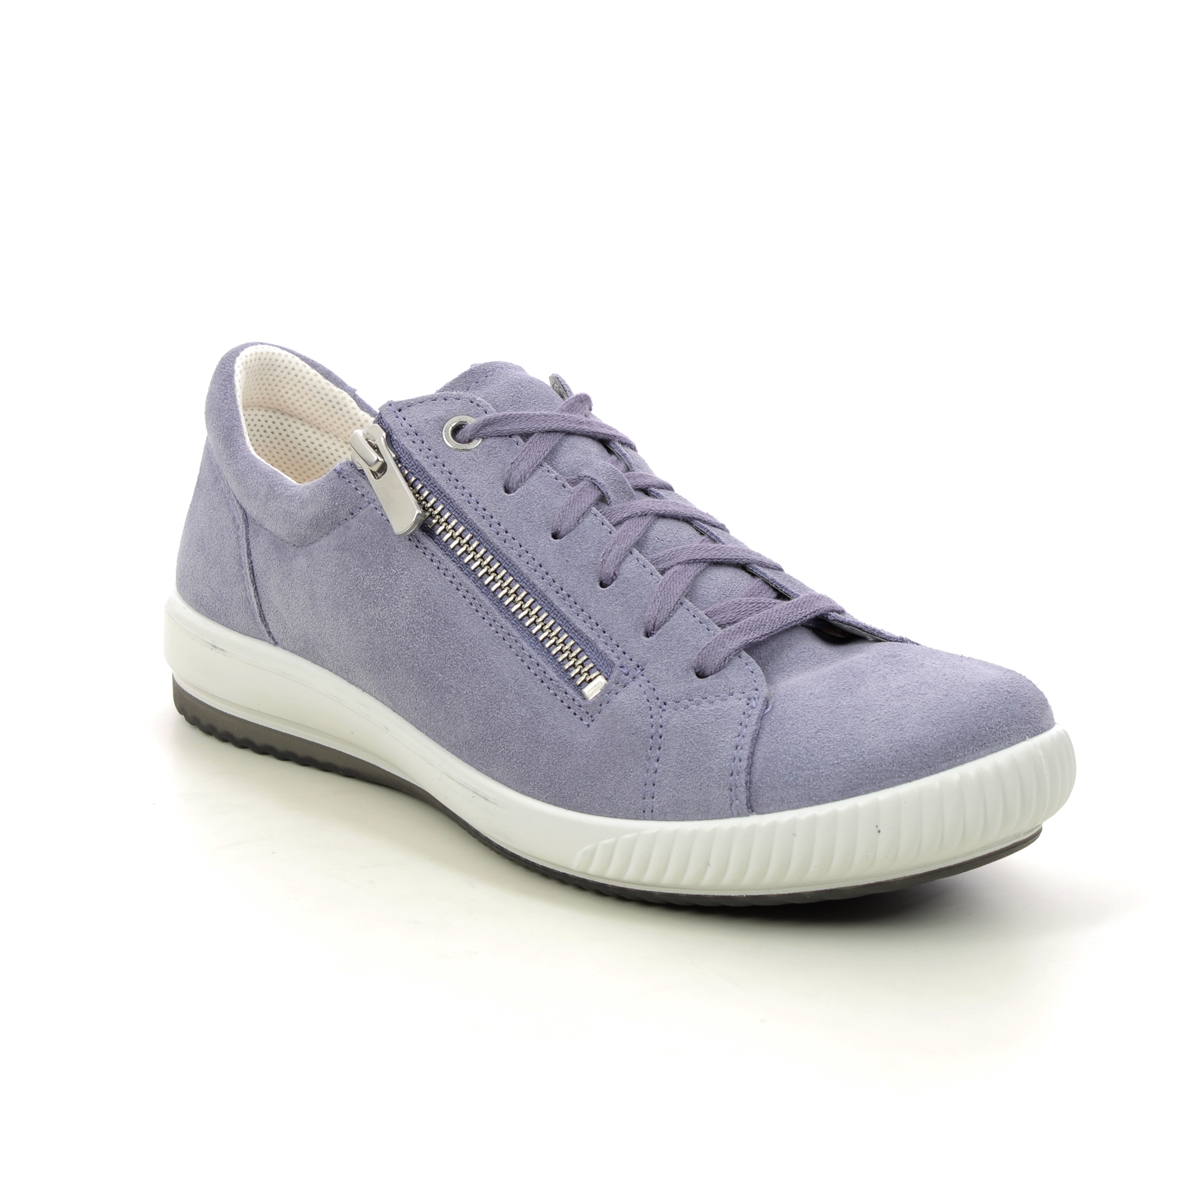 Legero Tanaro 5 Zip Lilac Womens lacing shoes 2001162-8510 in a Plain Leather in Size 5